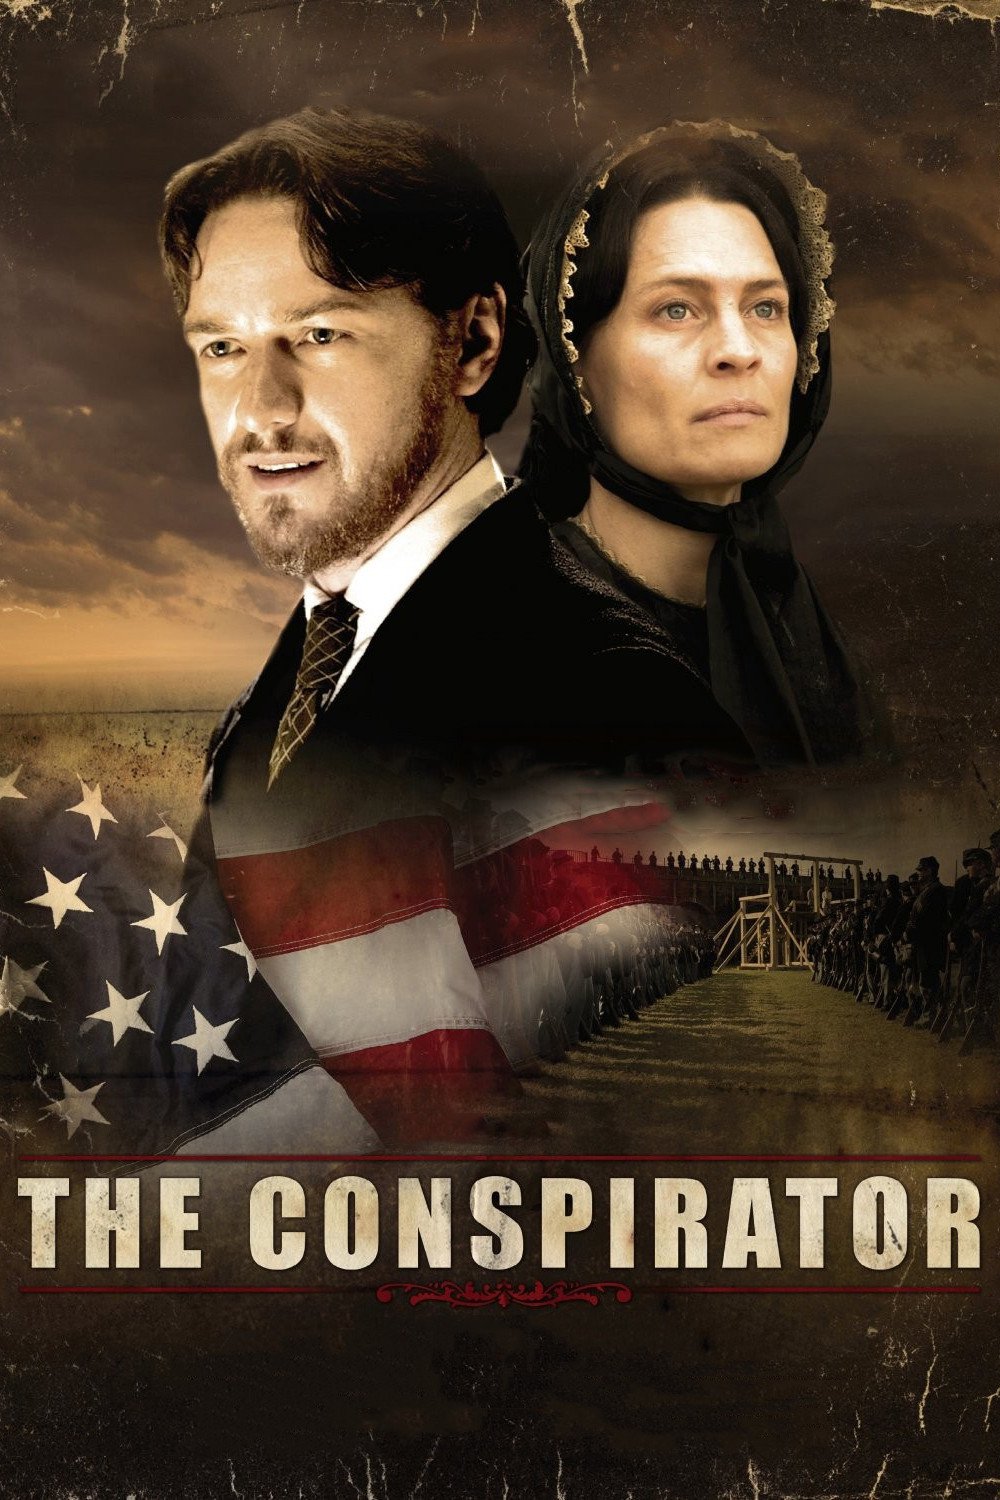 Poster for the movie "The Conspirator"